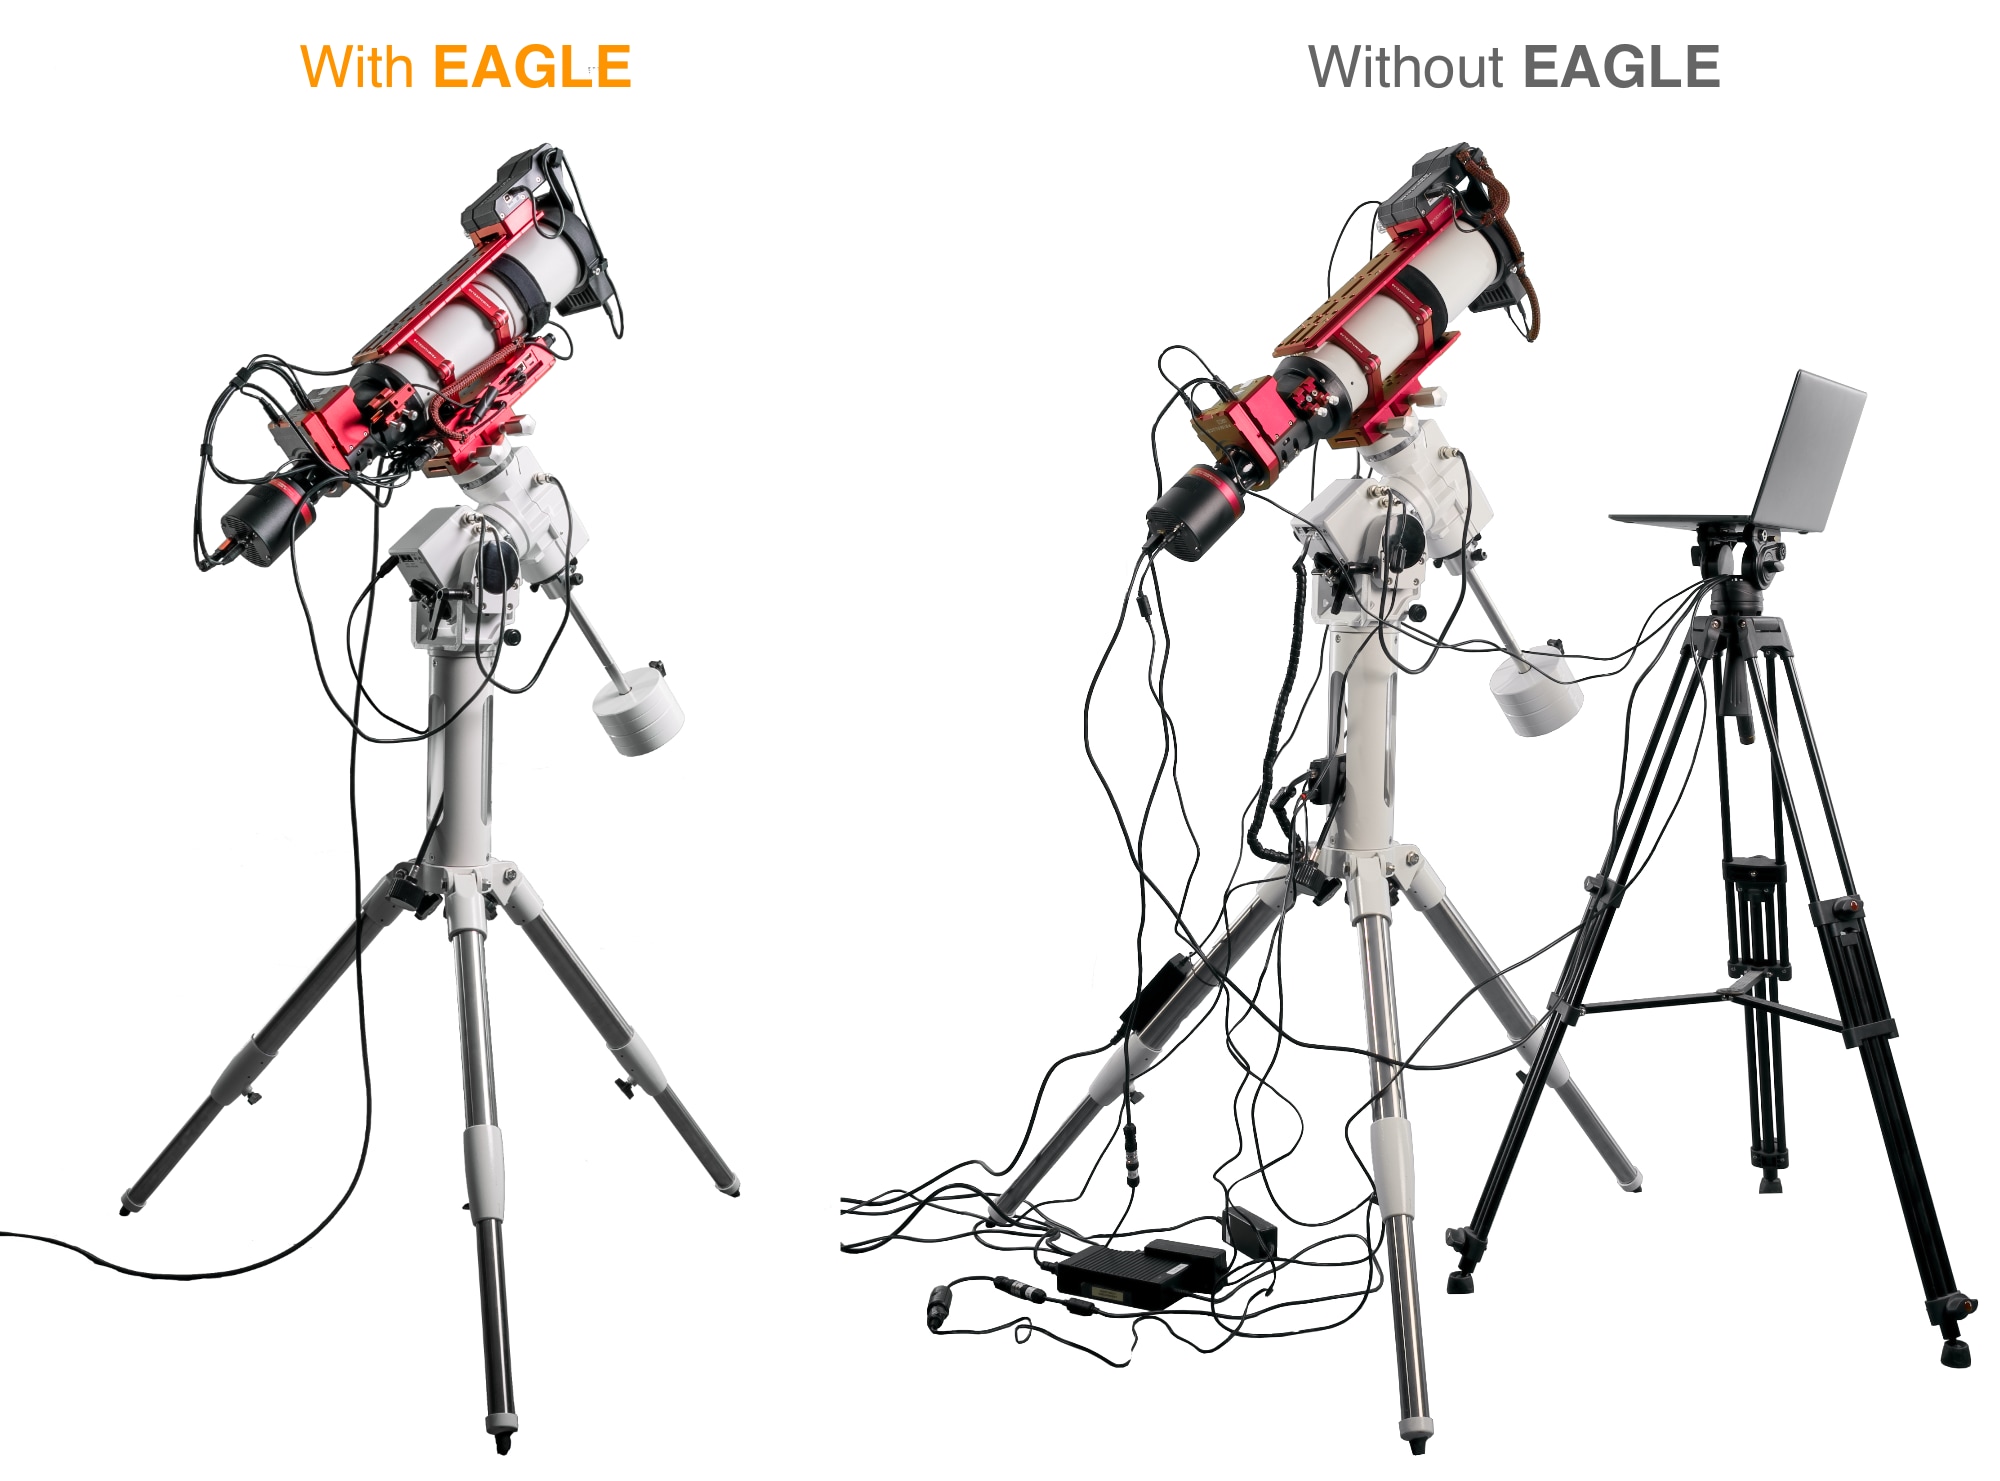 EAGLE5 S, computer for telescopes and astrophotography: EAGLE5 simplifies your telescope setup